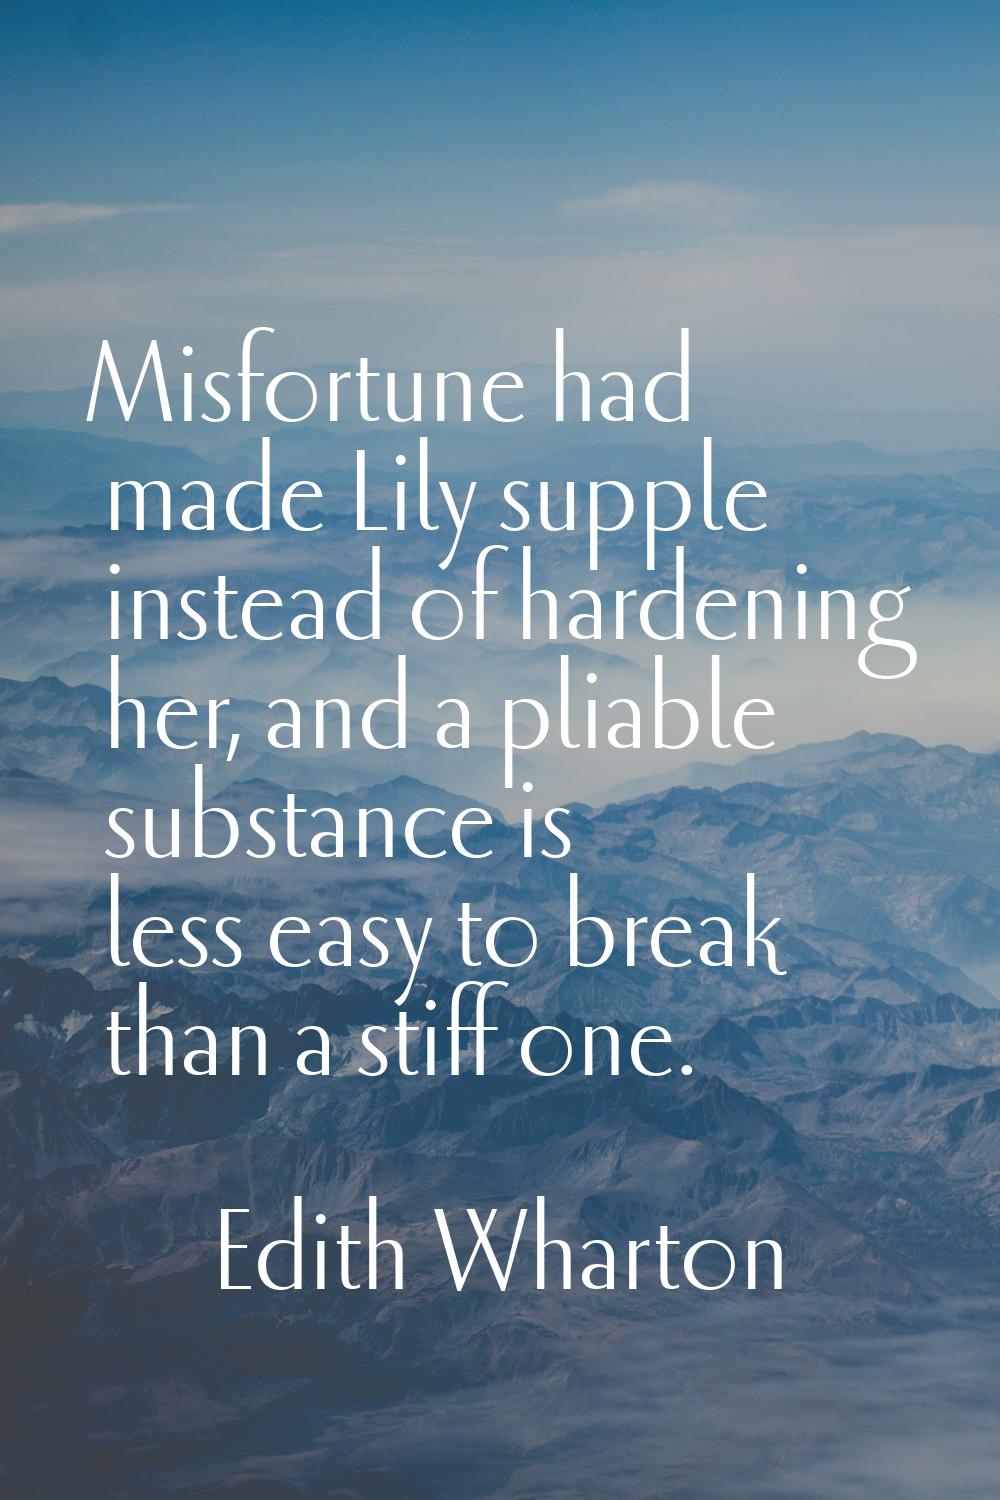 Misfortune had made Lily supple instead of hardening her, and a pliable substance is less easy to b